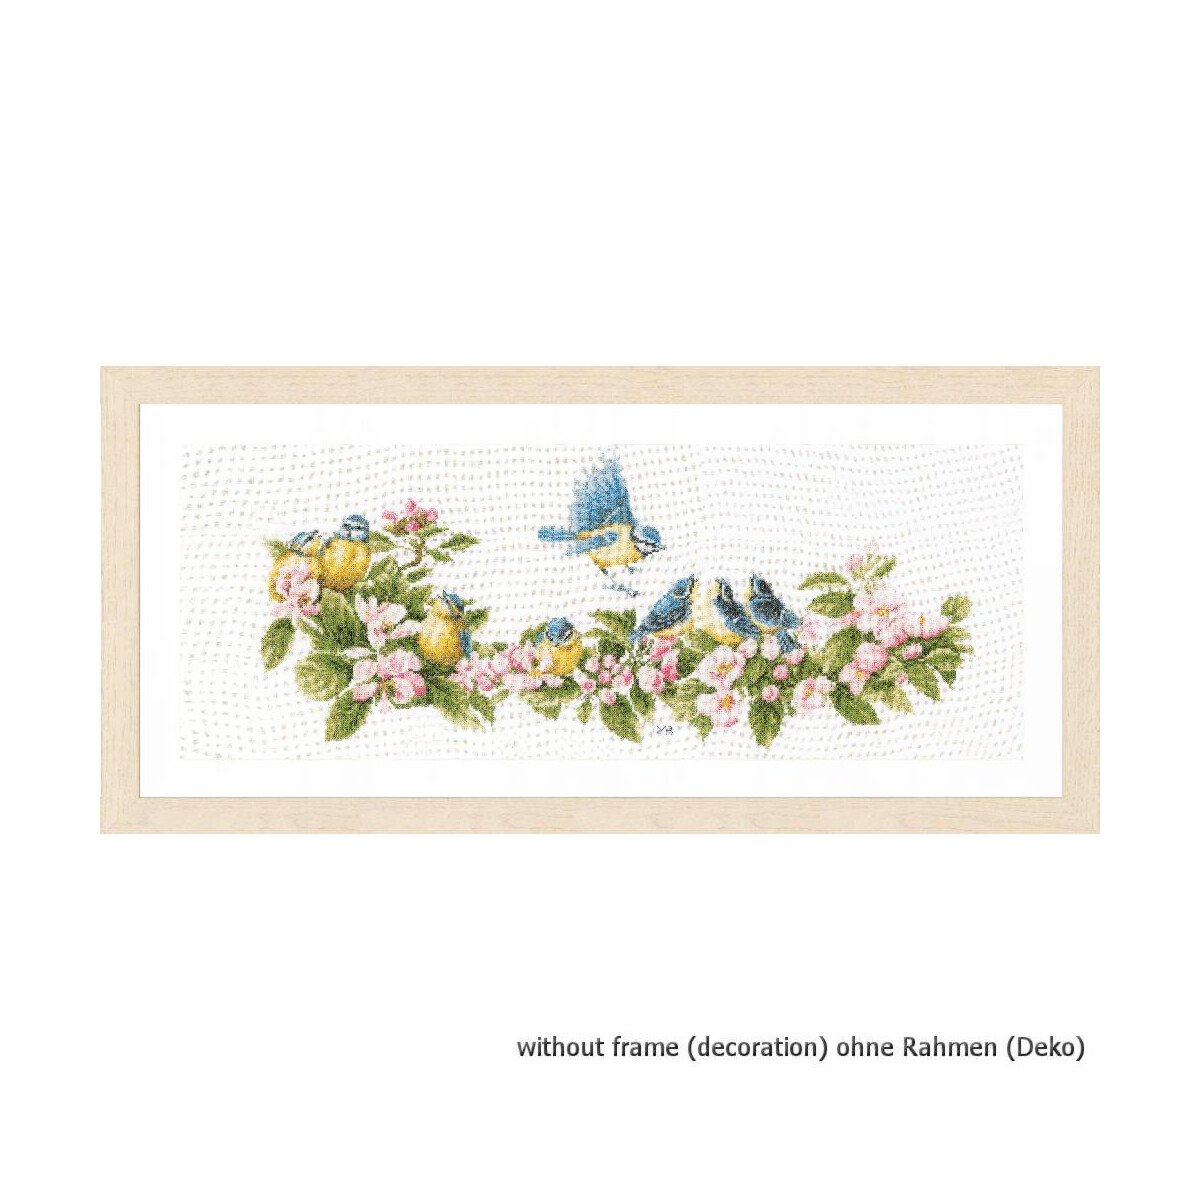 A charming cross stitch embroidery design from Lanarte...